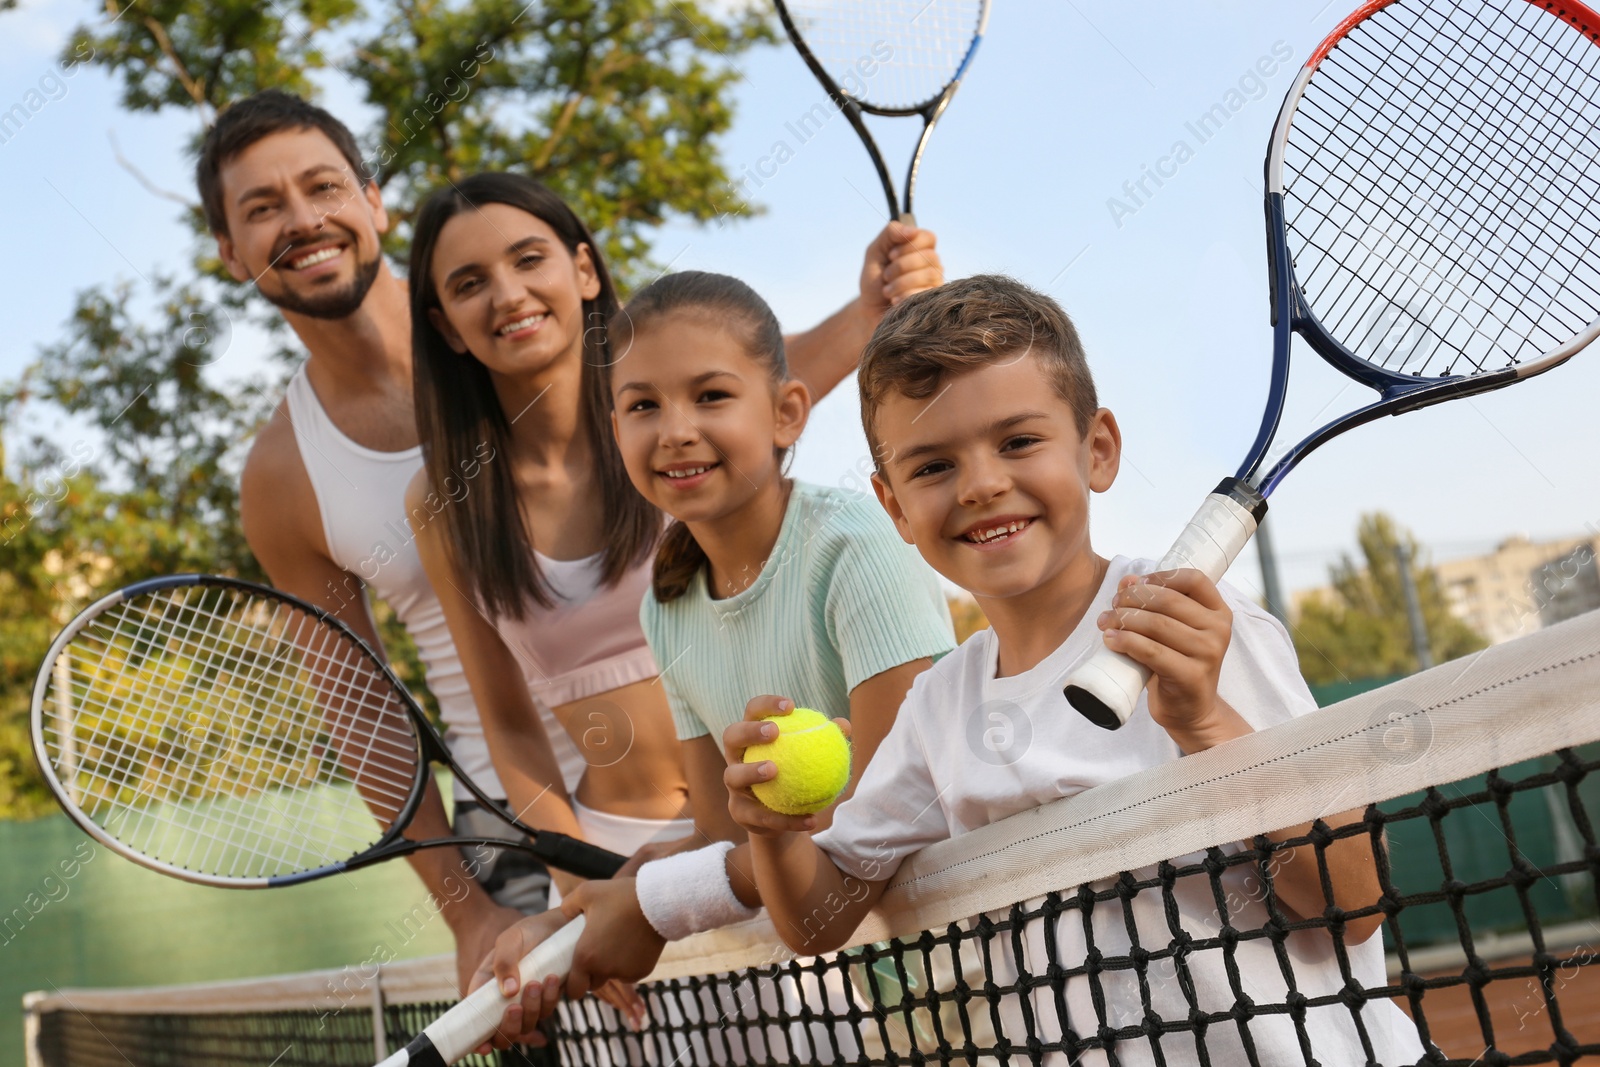 Photo of Happy family with tennis rackets on court outdoors